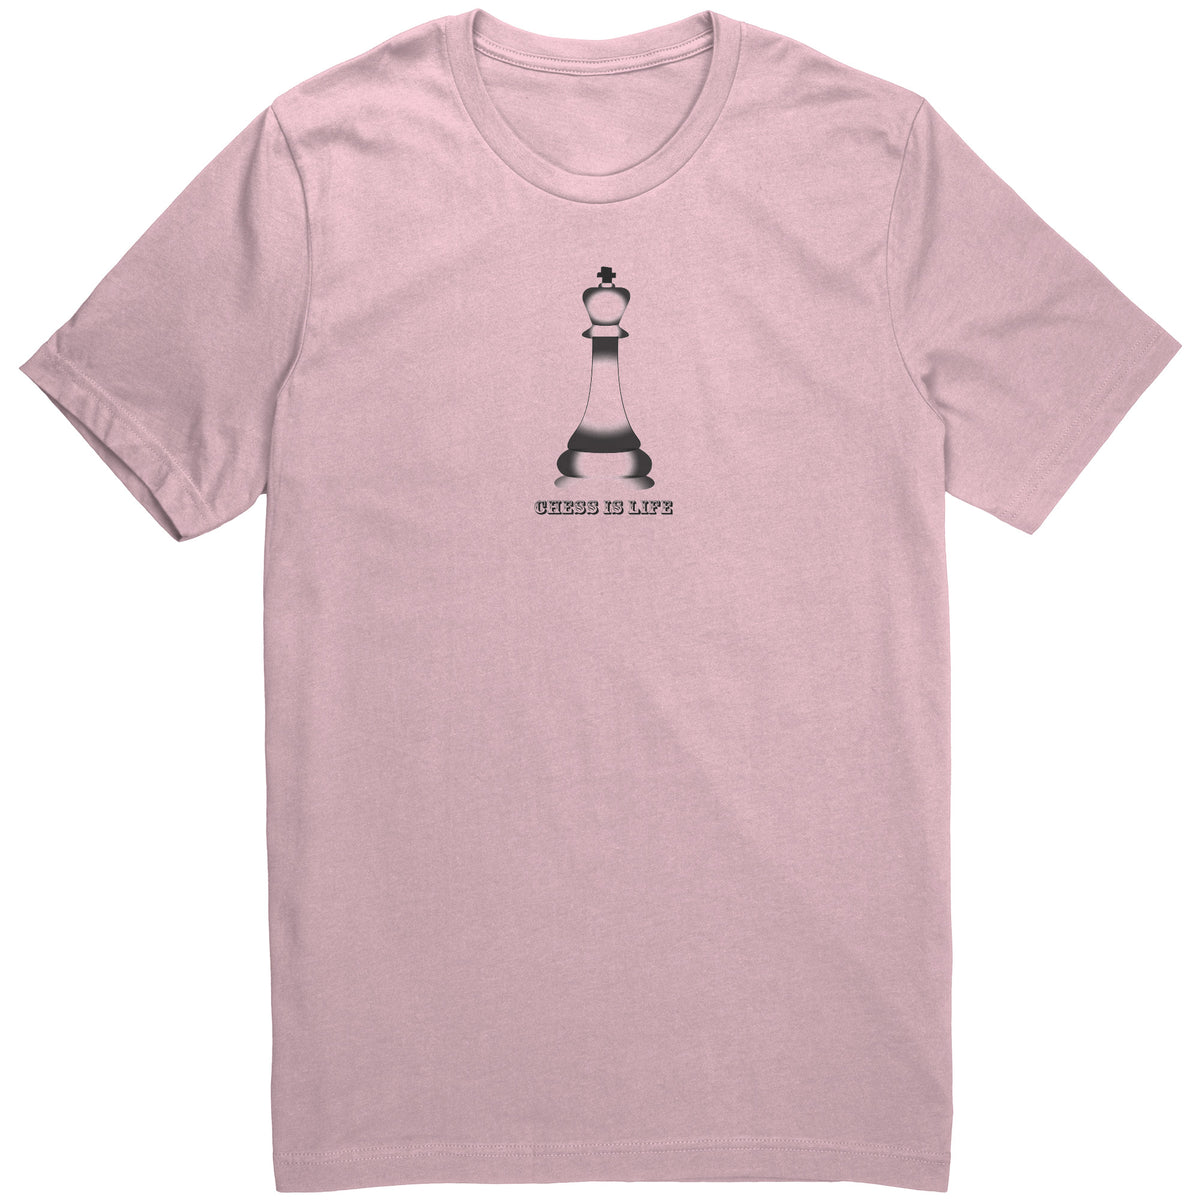 Chess is life - King Adult Unisex T-Shirt